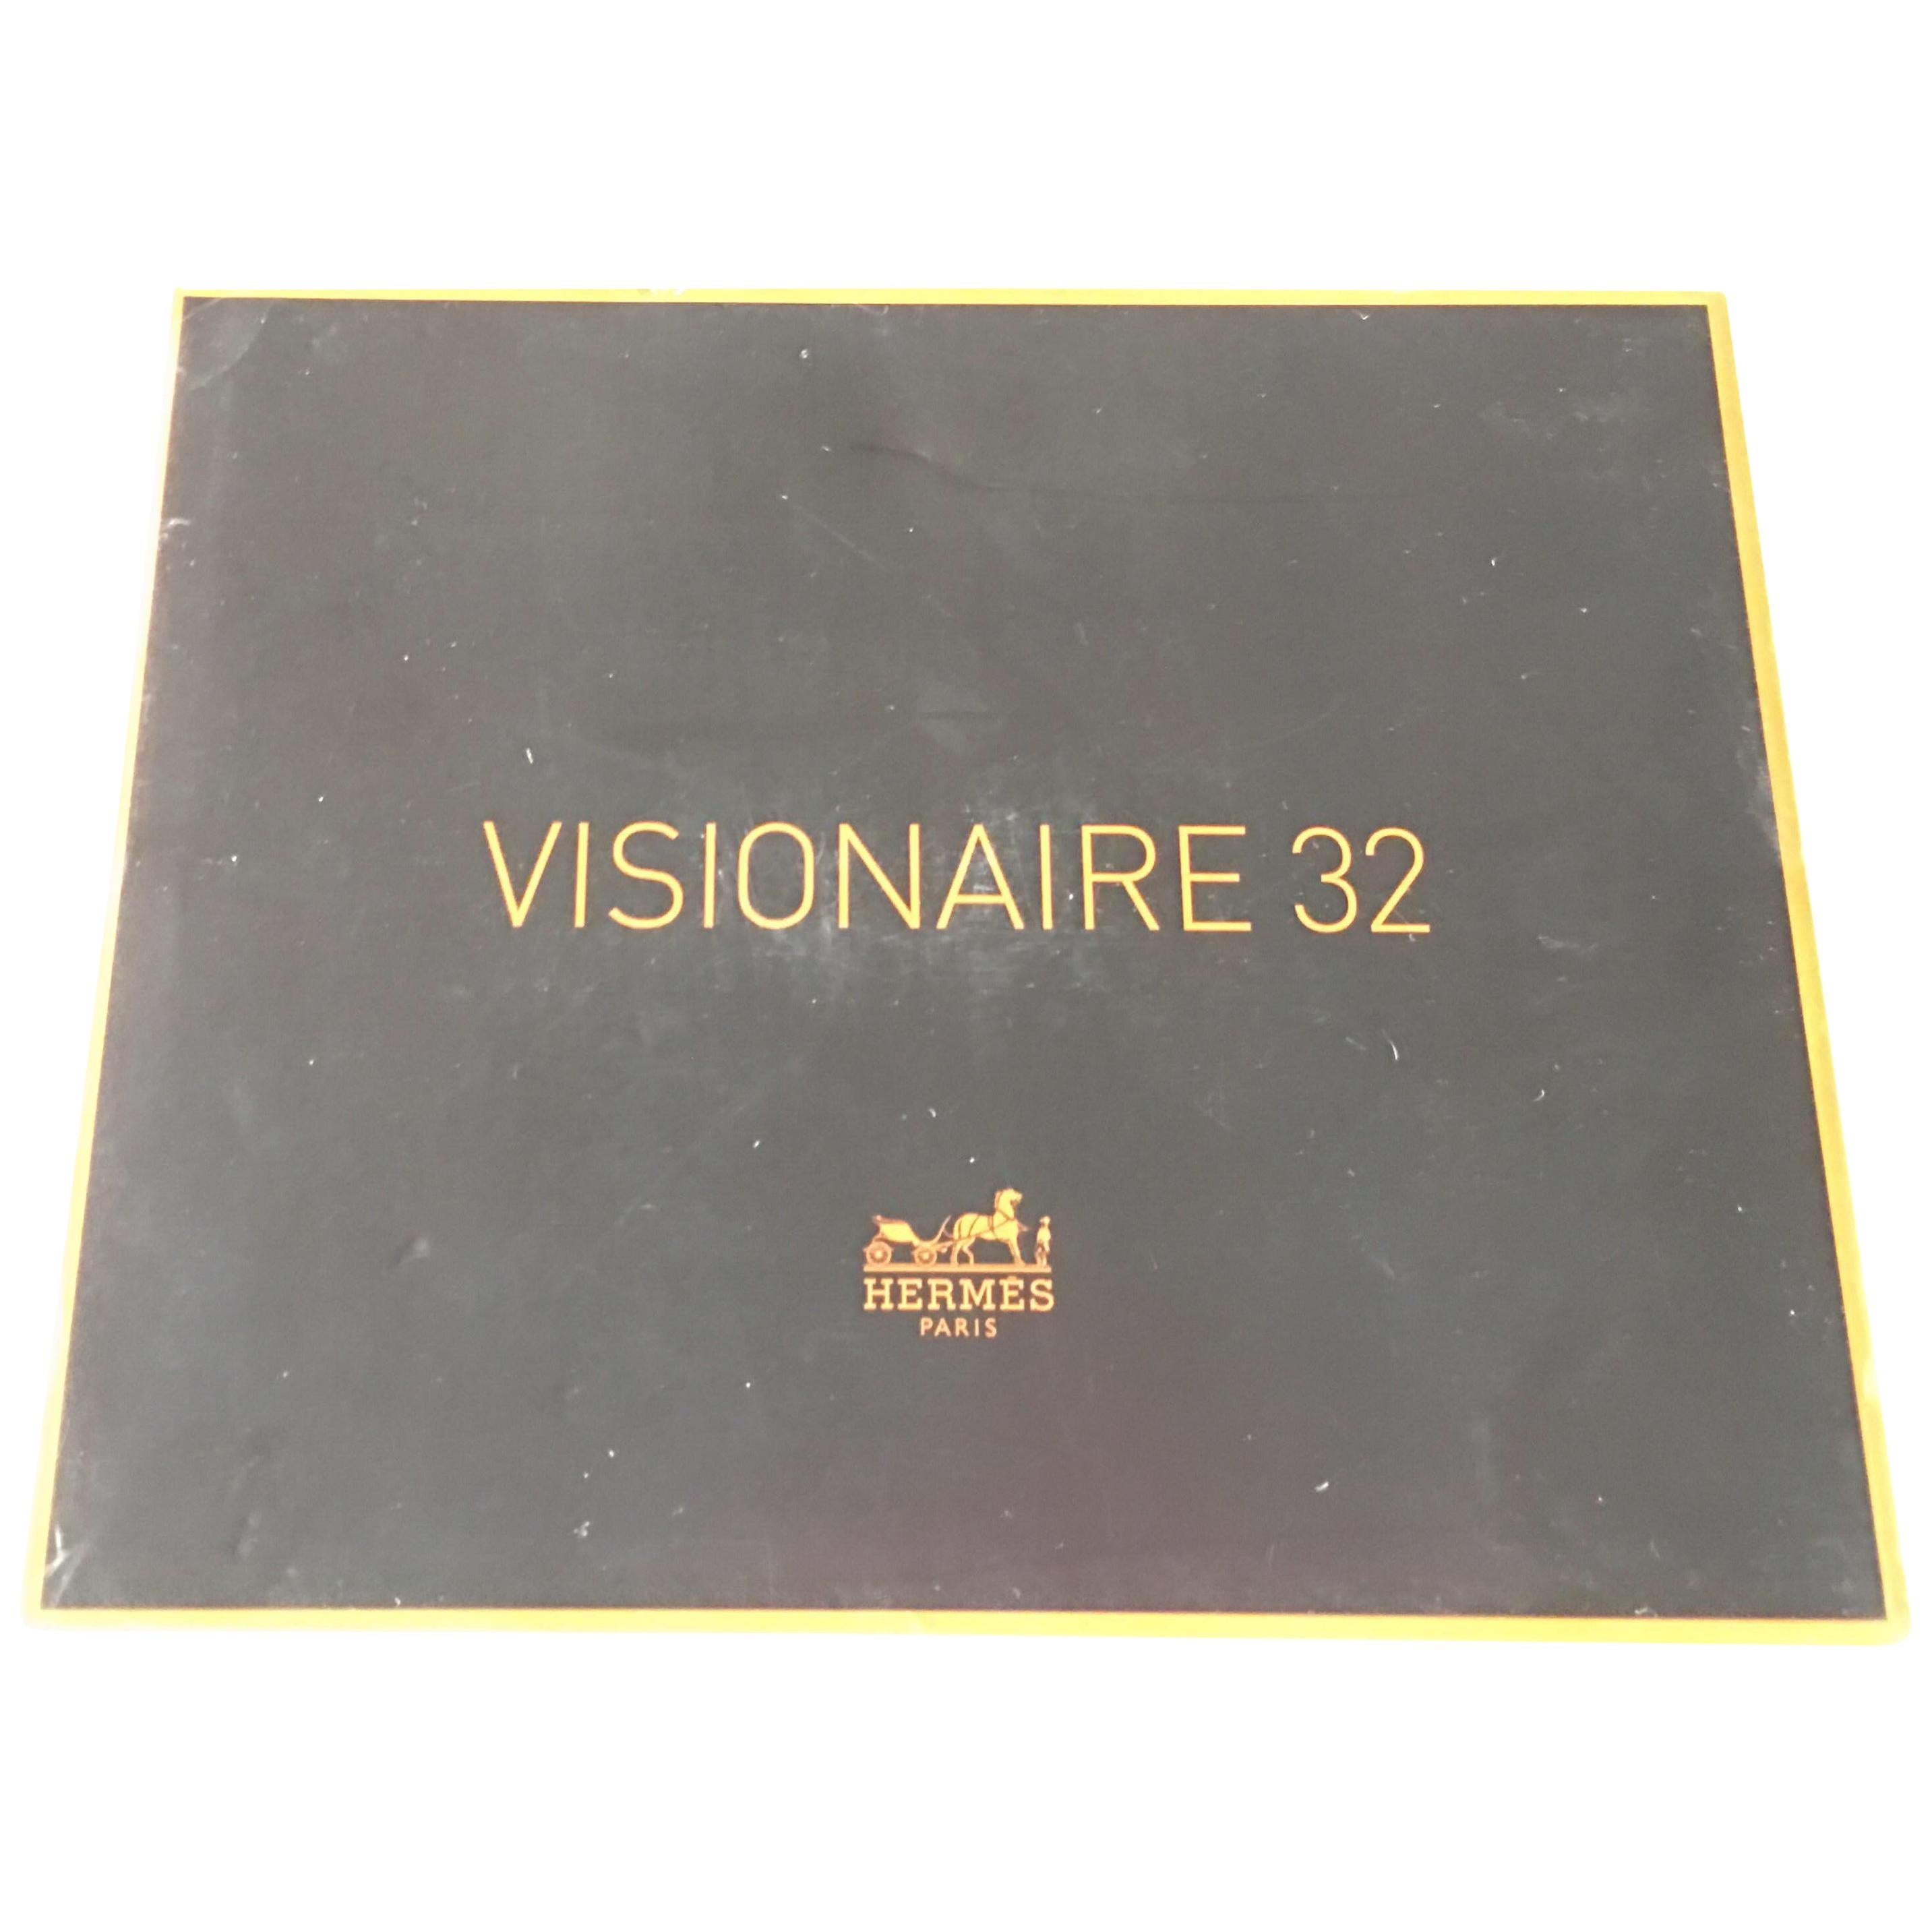 Hermes Visionaire Number 32 “Where?” Limited Edition